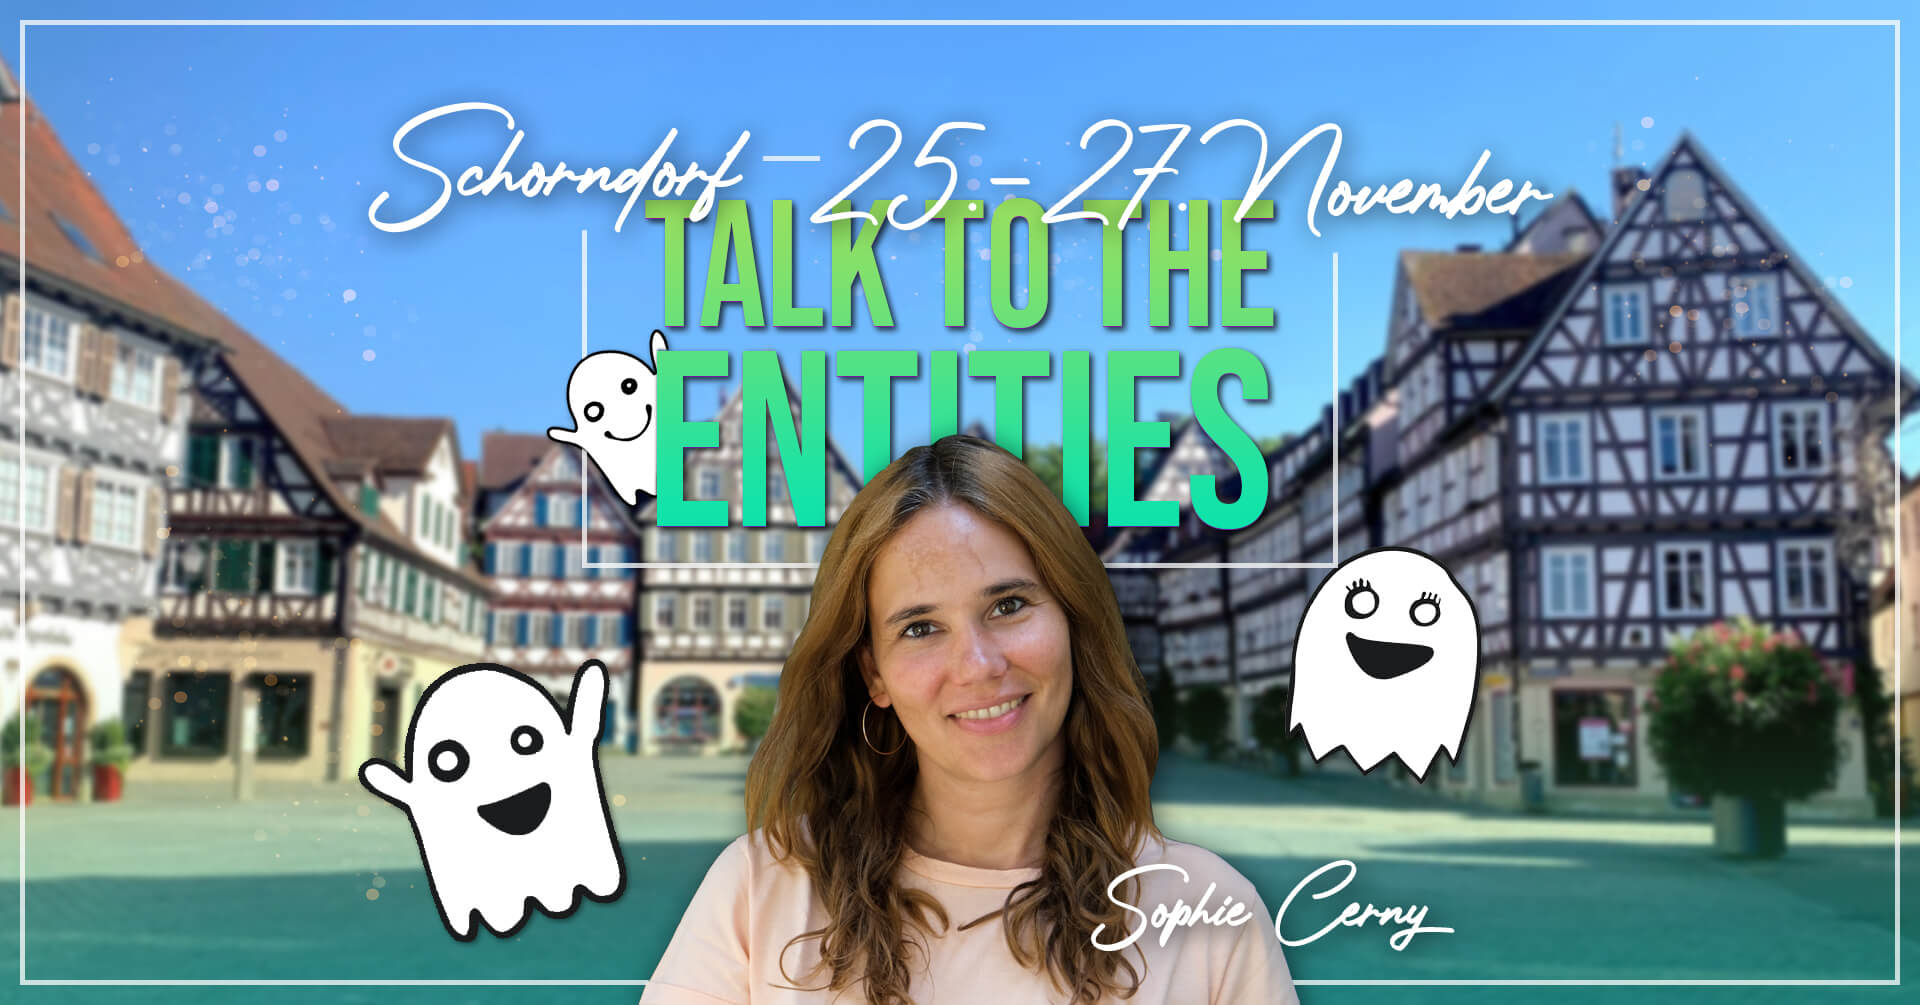 Talk to the Entities Schorndorf Sophie Cerny